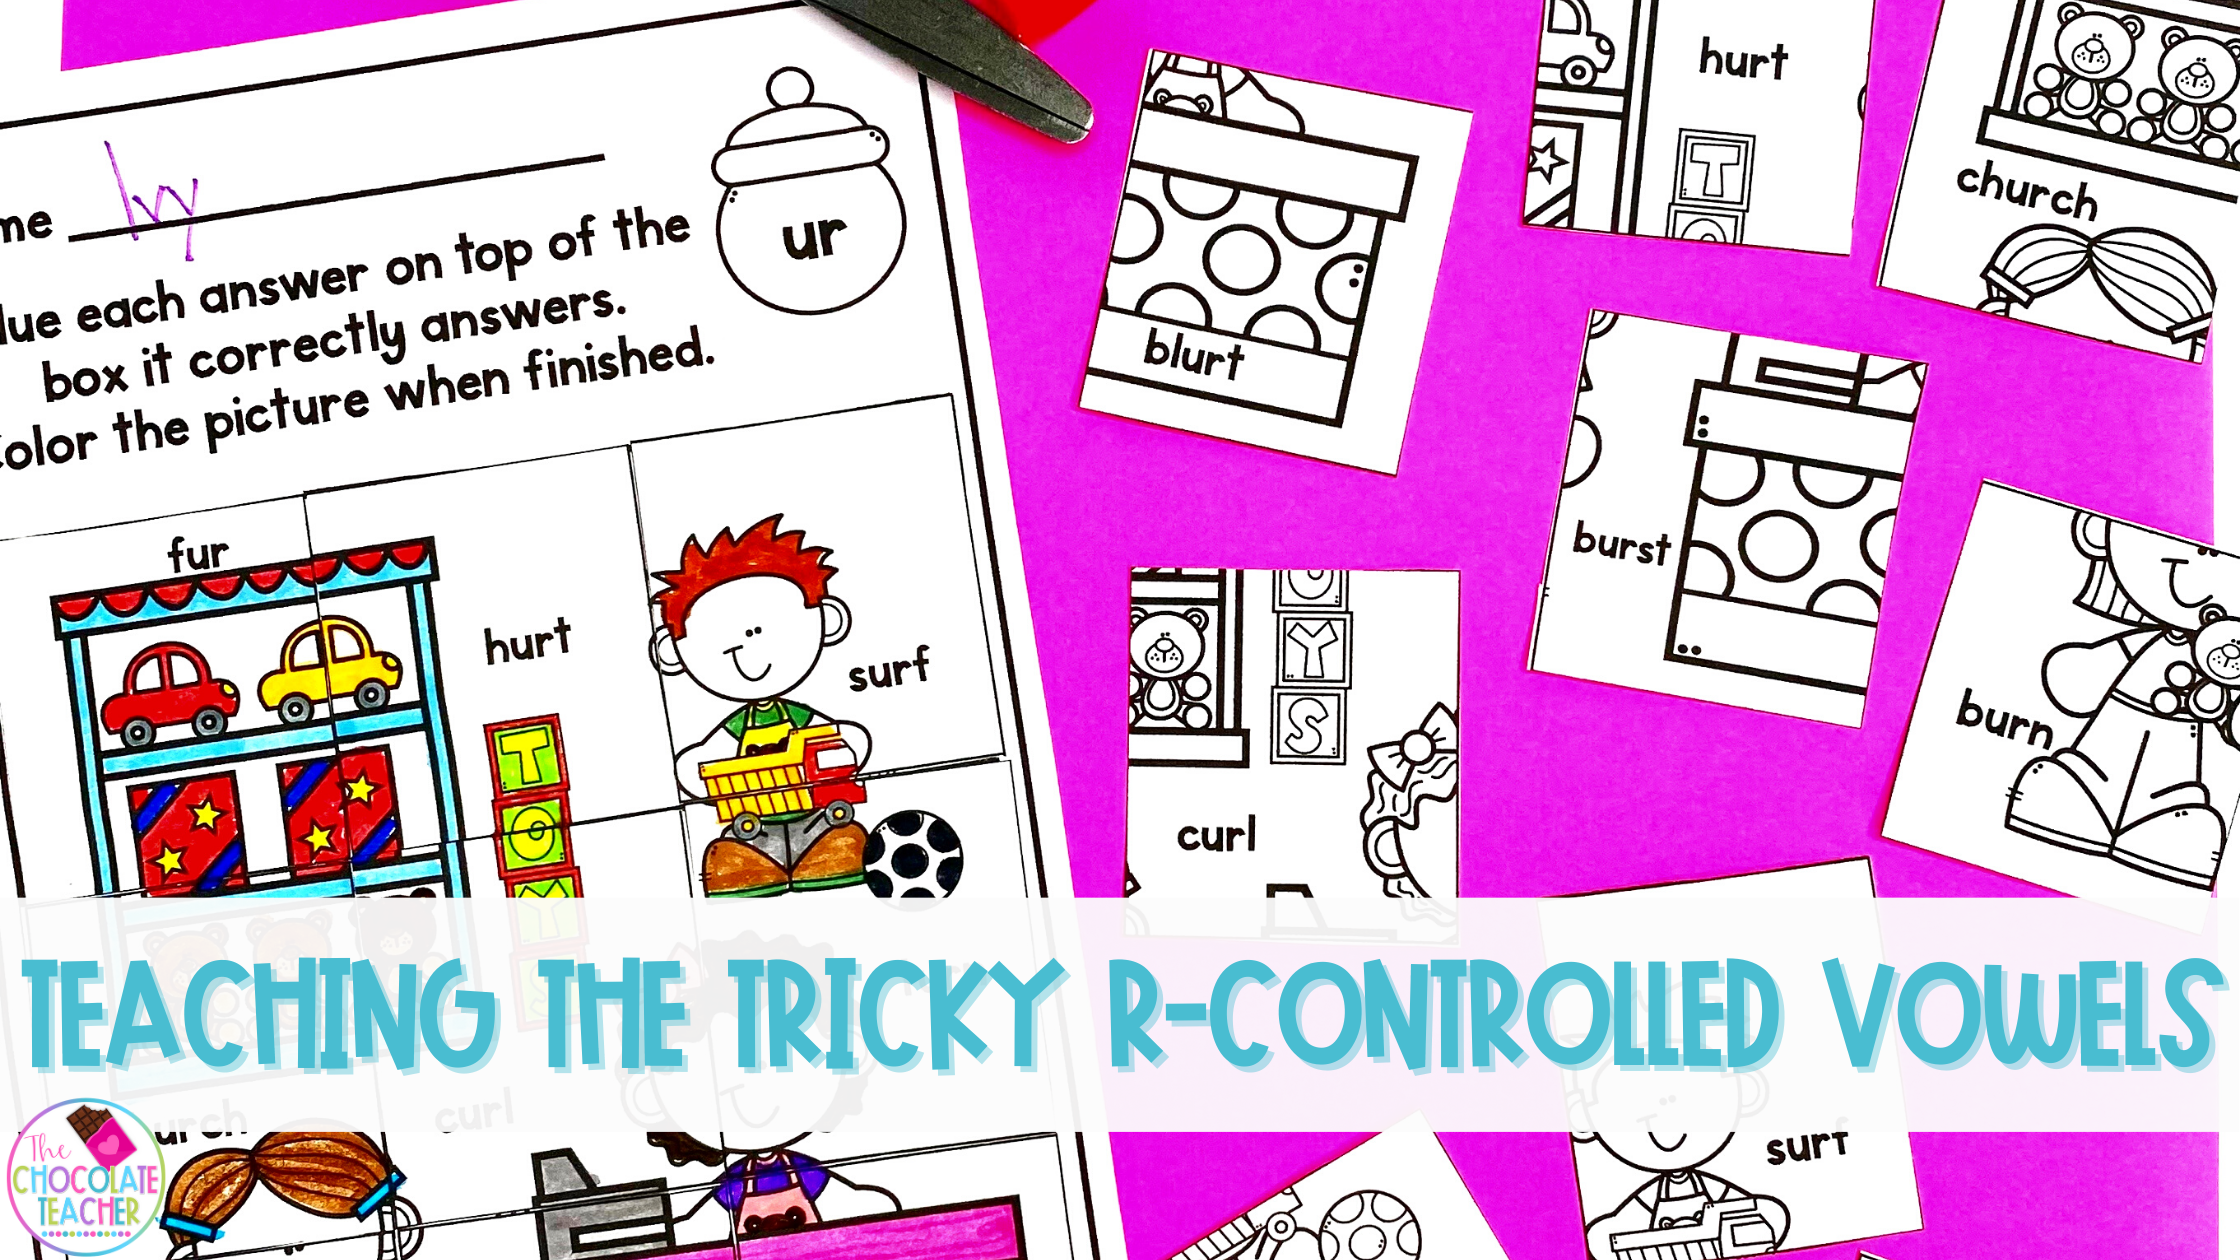 Use these fun and engaging activities as you are teaching the tricky r-controlled vowels to your first graders this year.